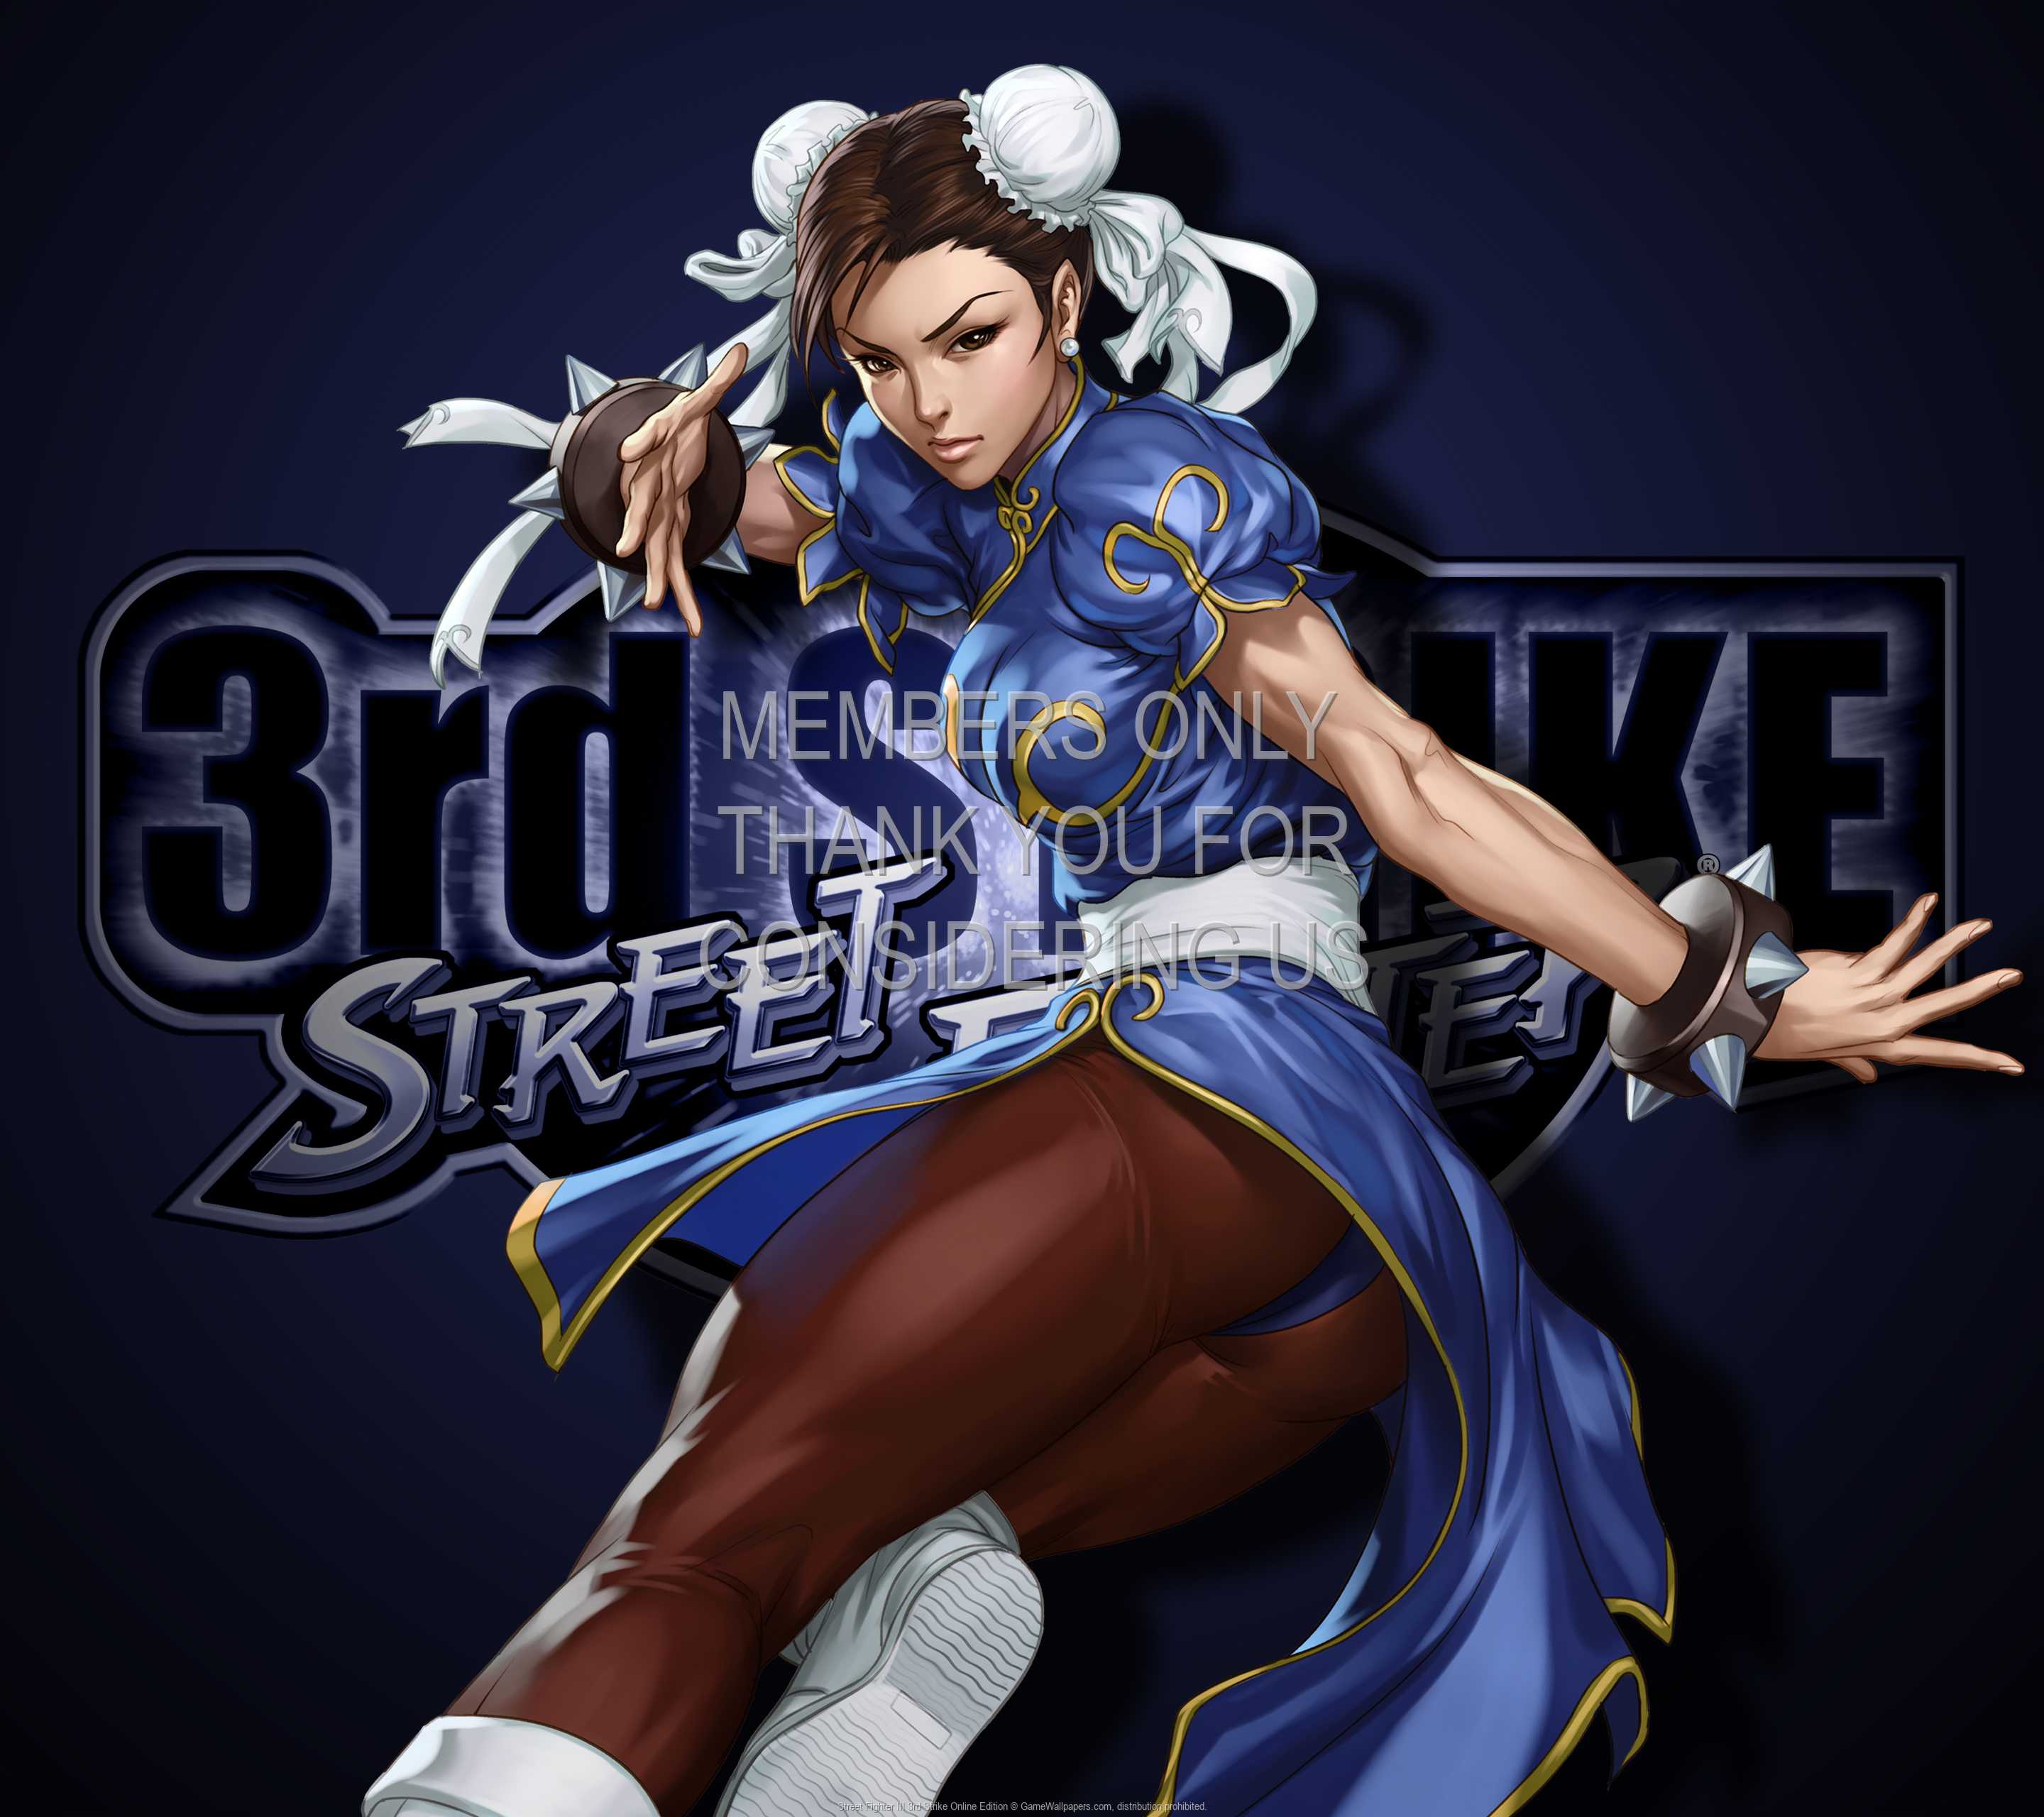 Street Fighter III: 3rd Strike Online Edition 1440p Horizontal Mobile wallpaper or background 01